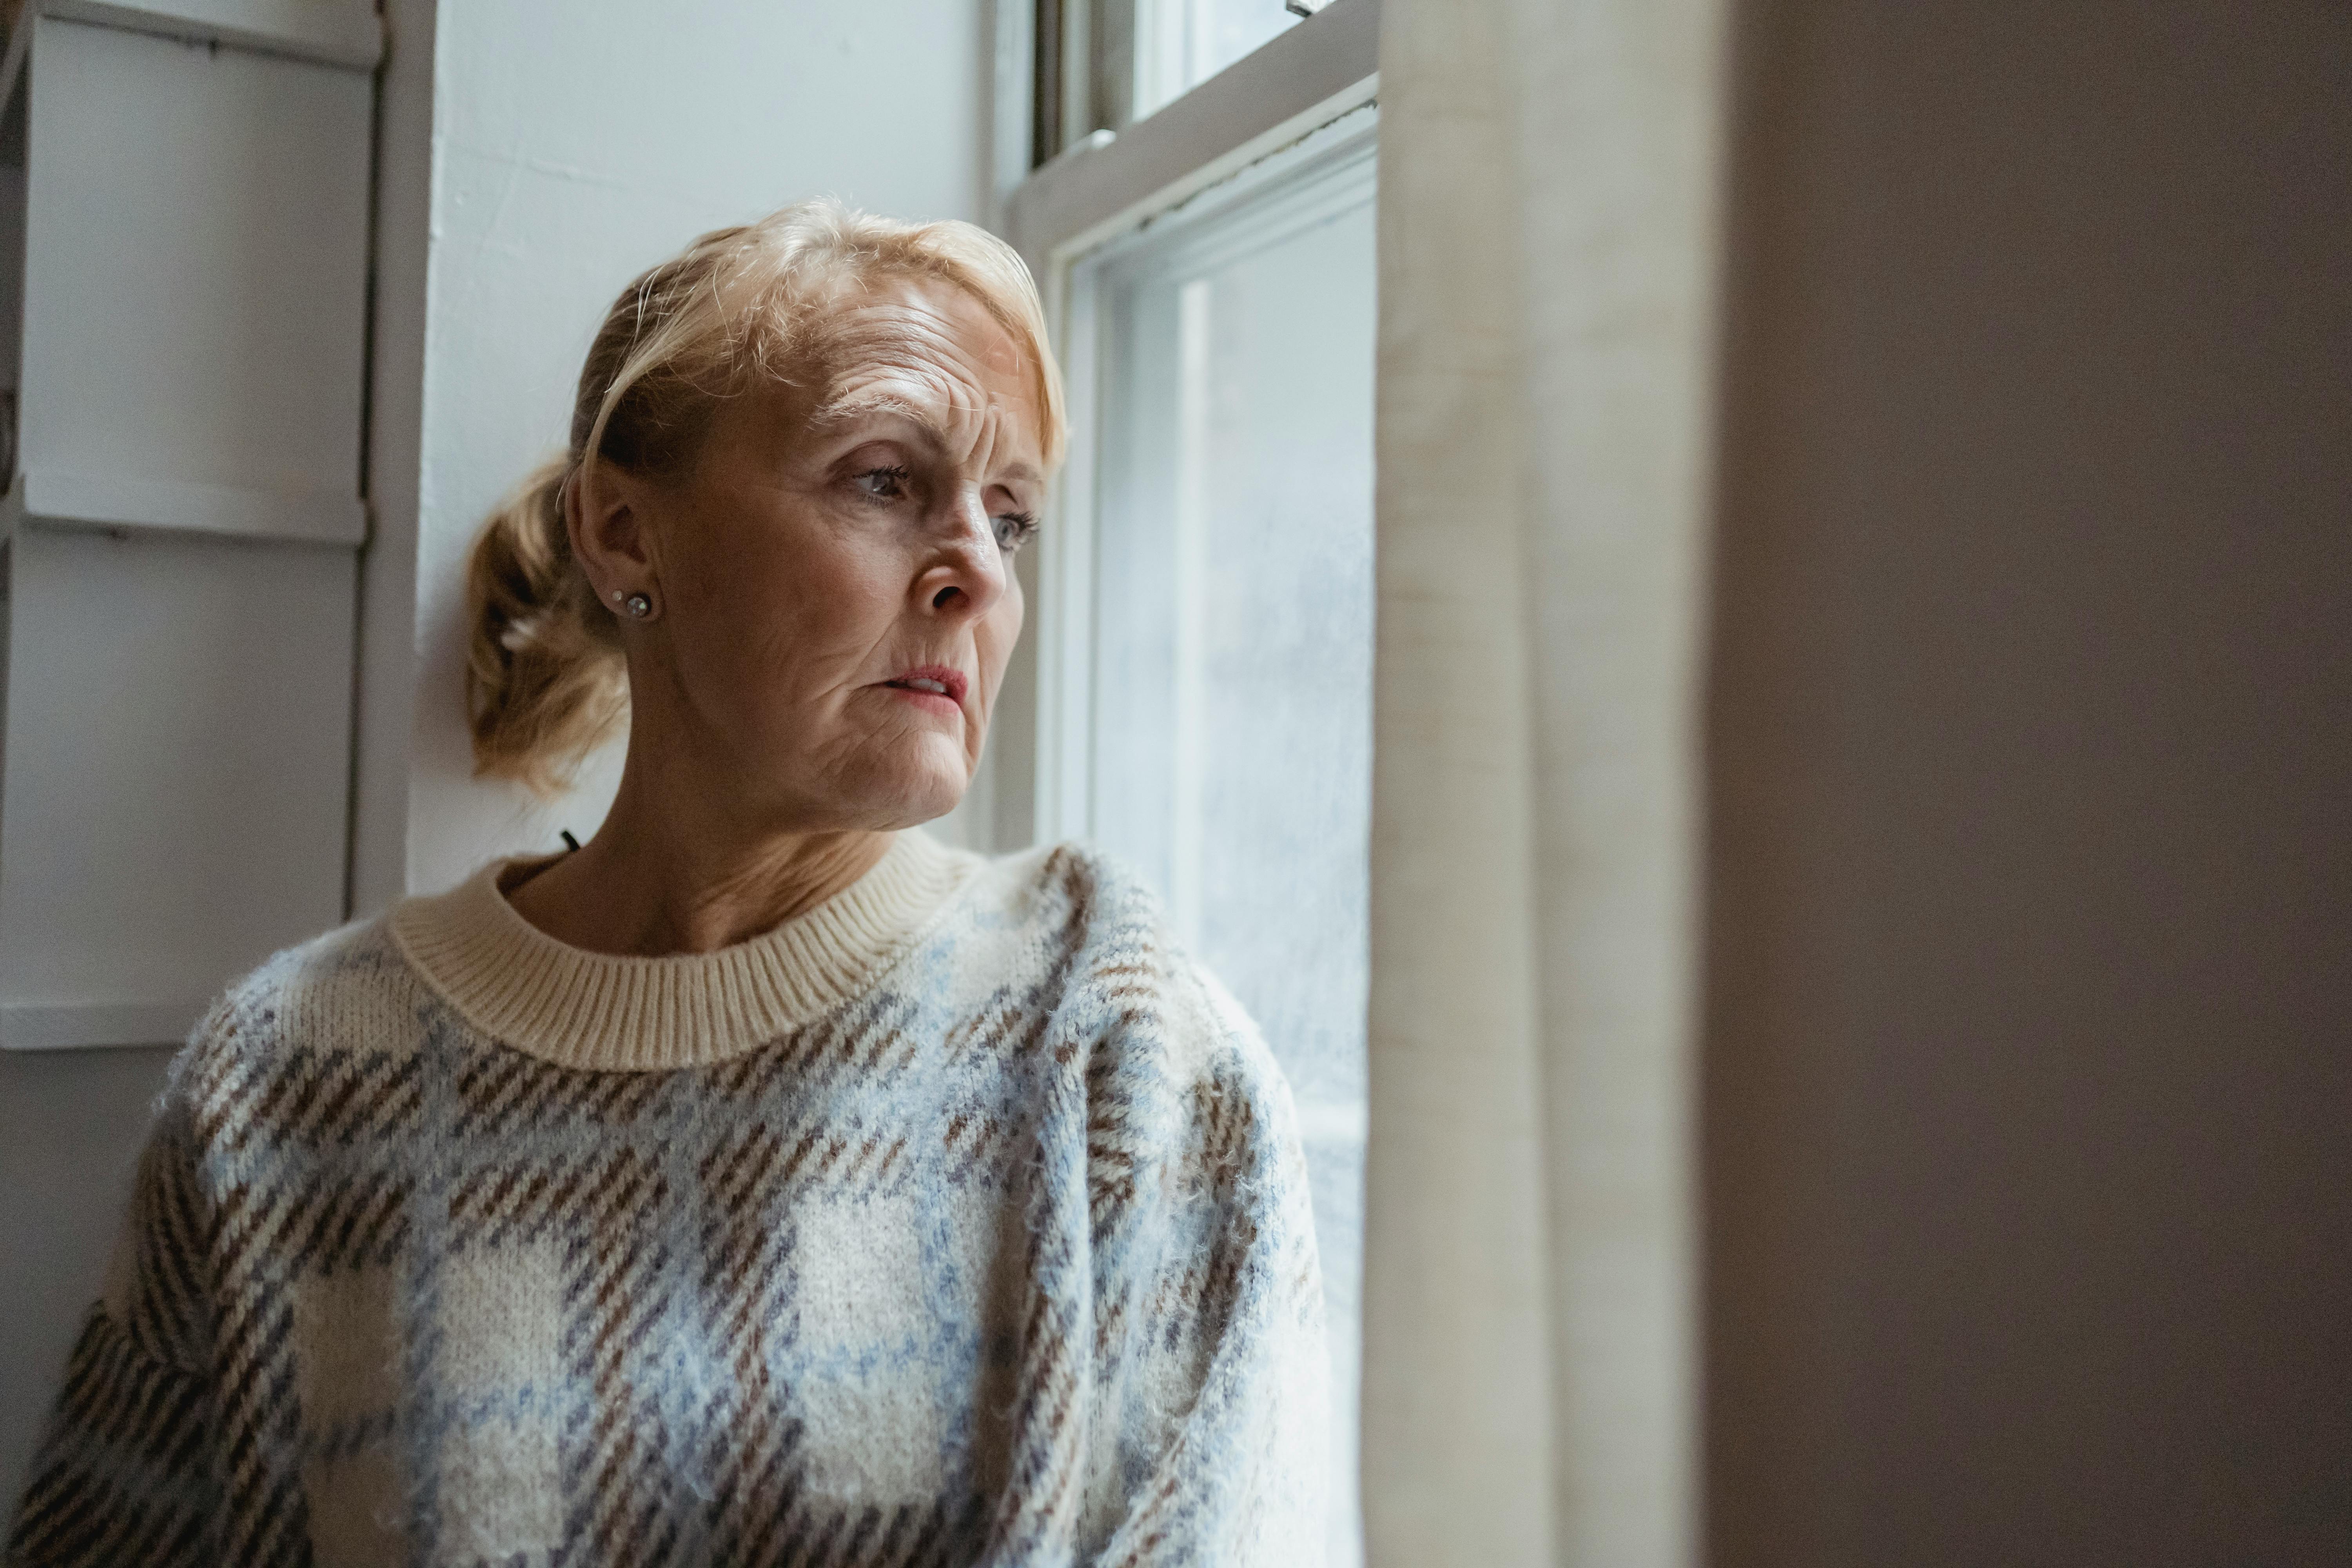 A sad-looking woman looking out of the window | Source: Pexels